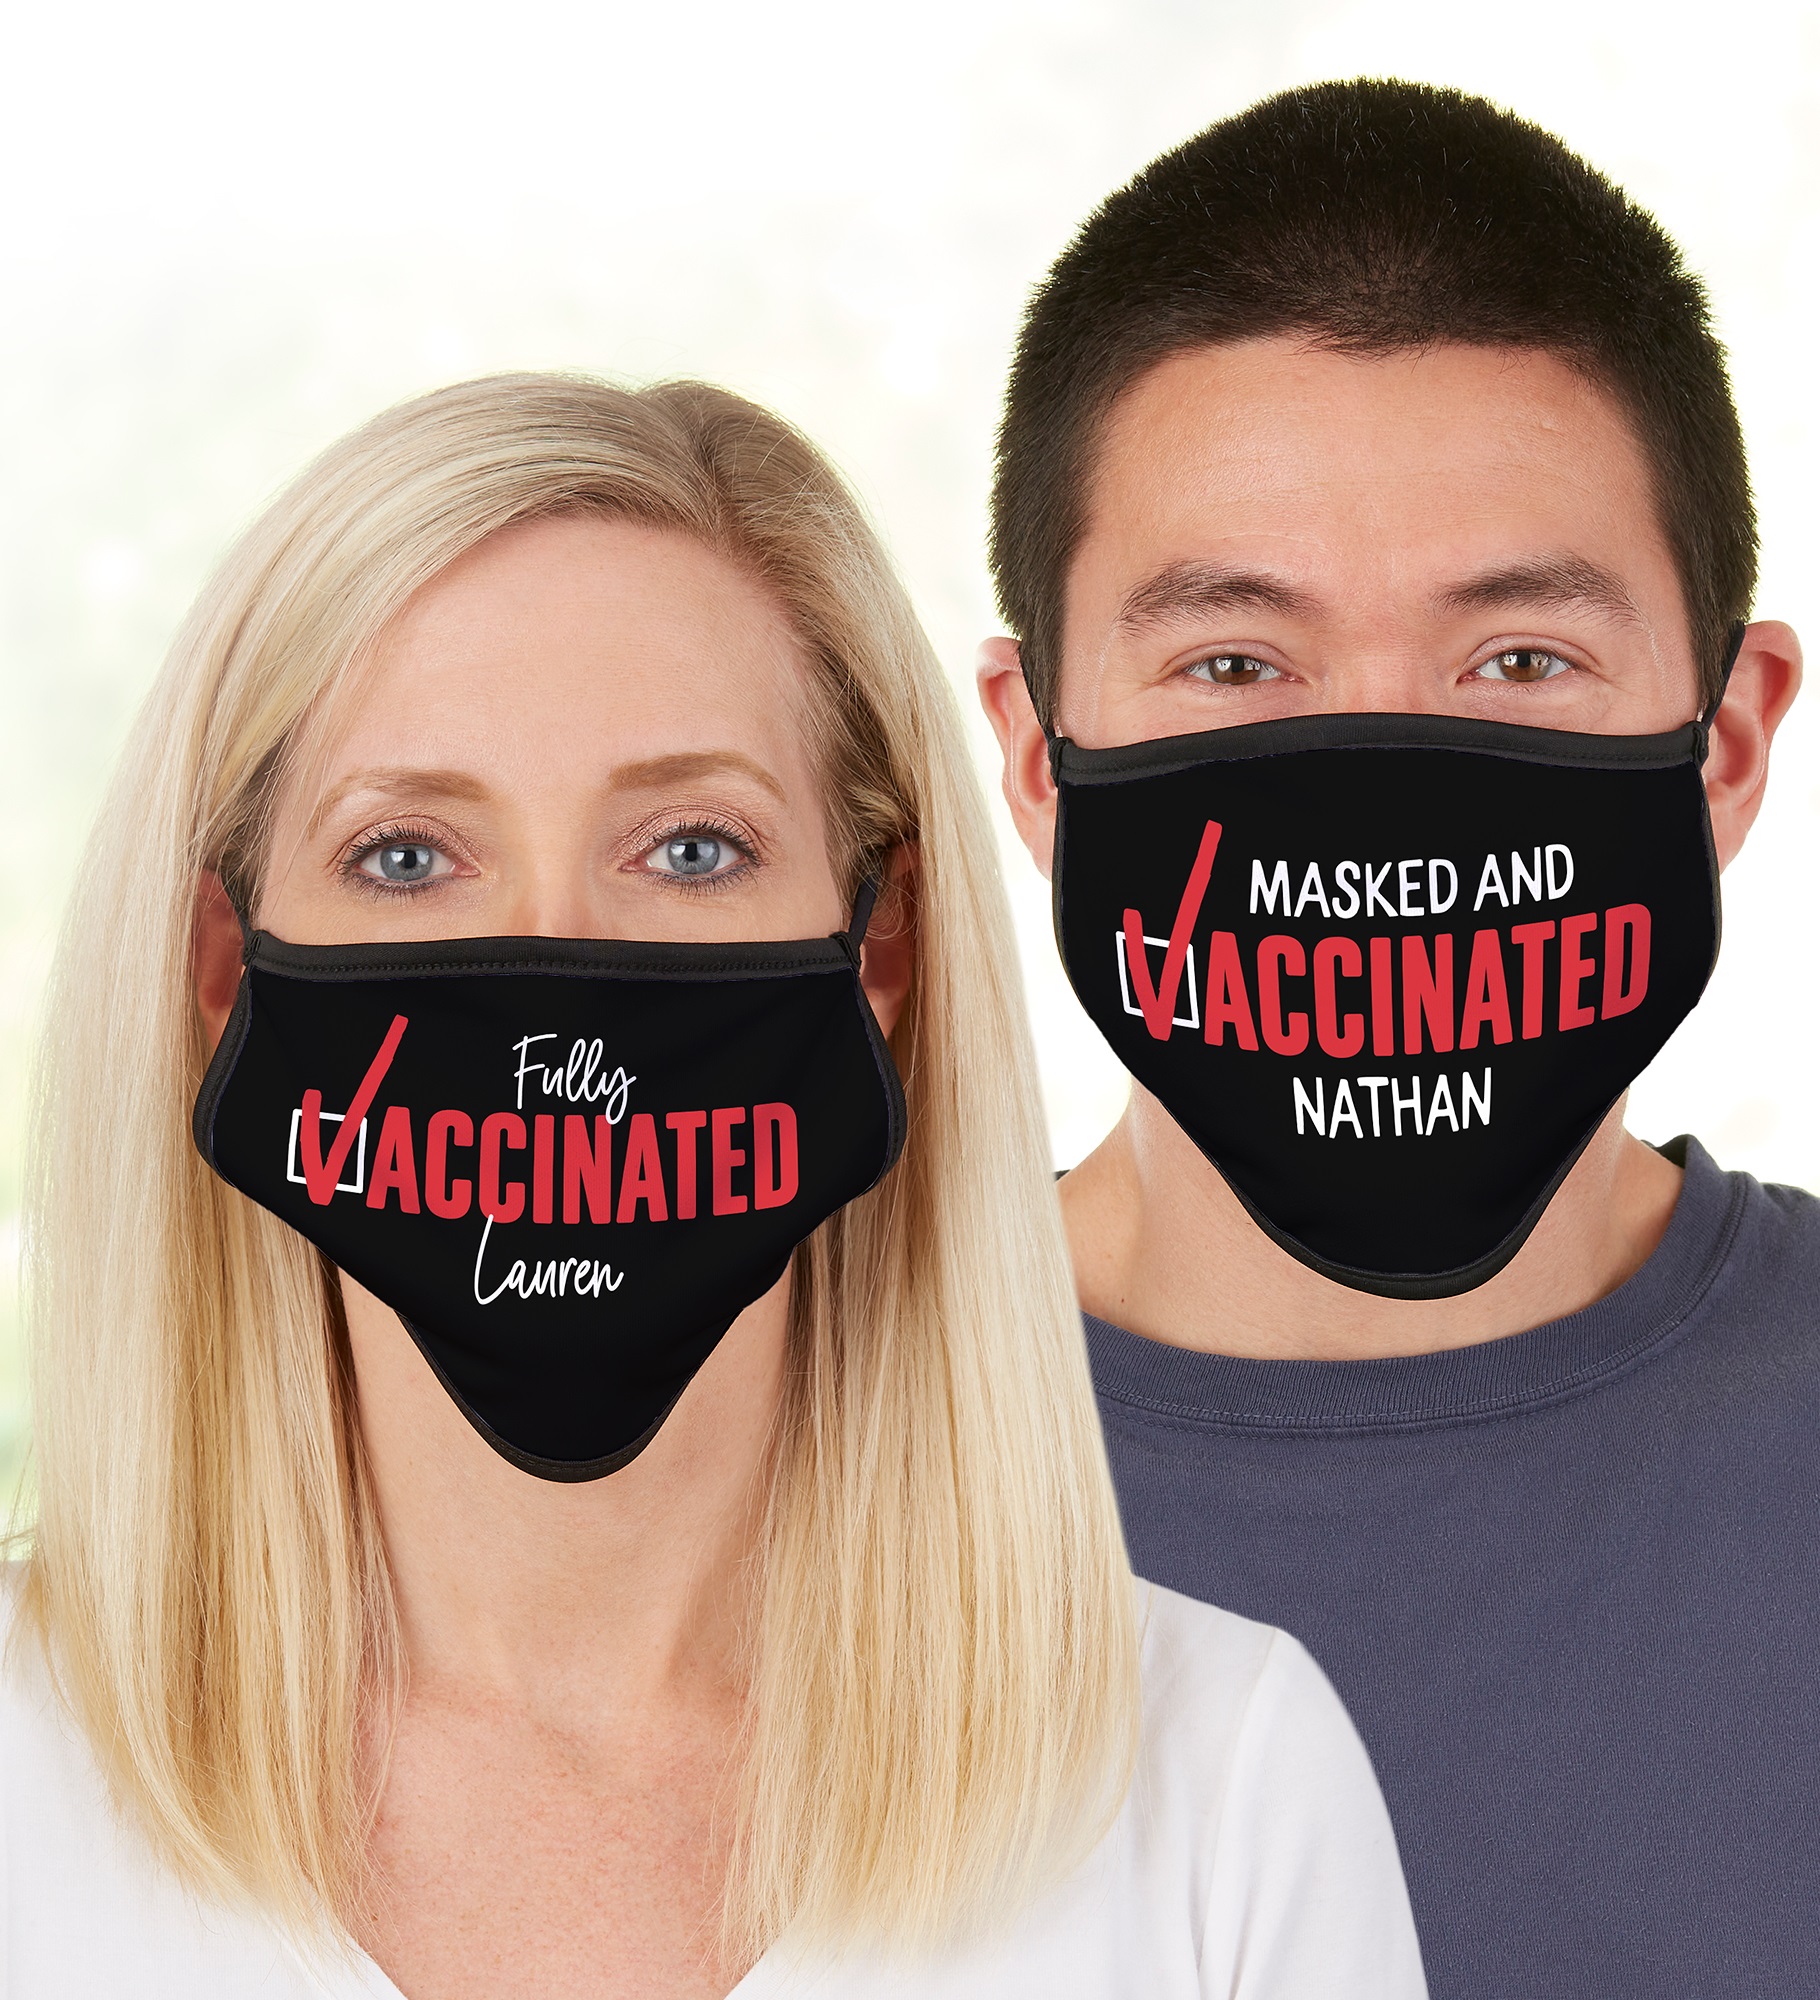 Vaccinated Personalized Adult Face Mask